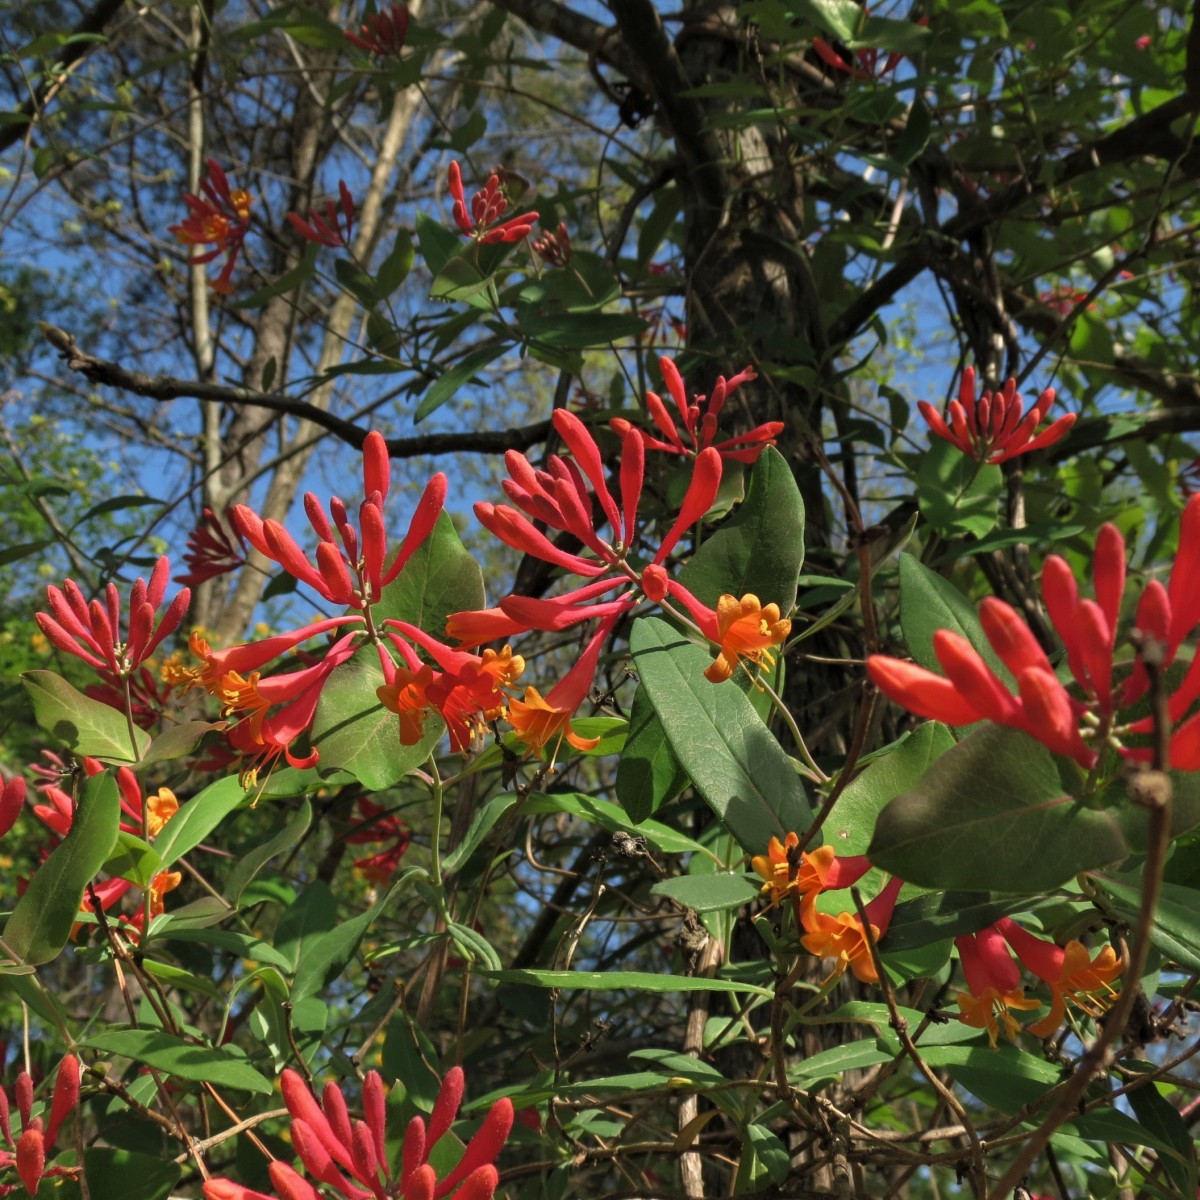 Know Your Natives – Trumpet Honeysuckle